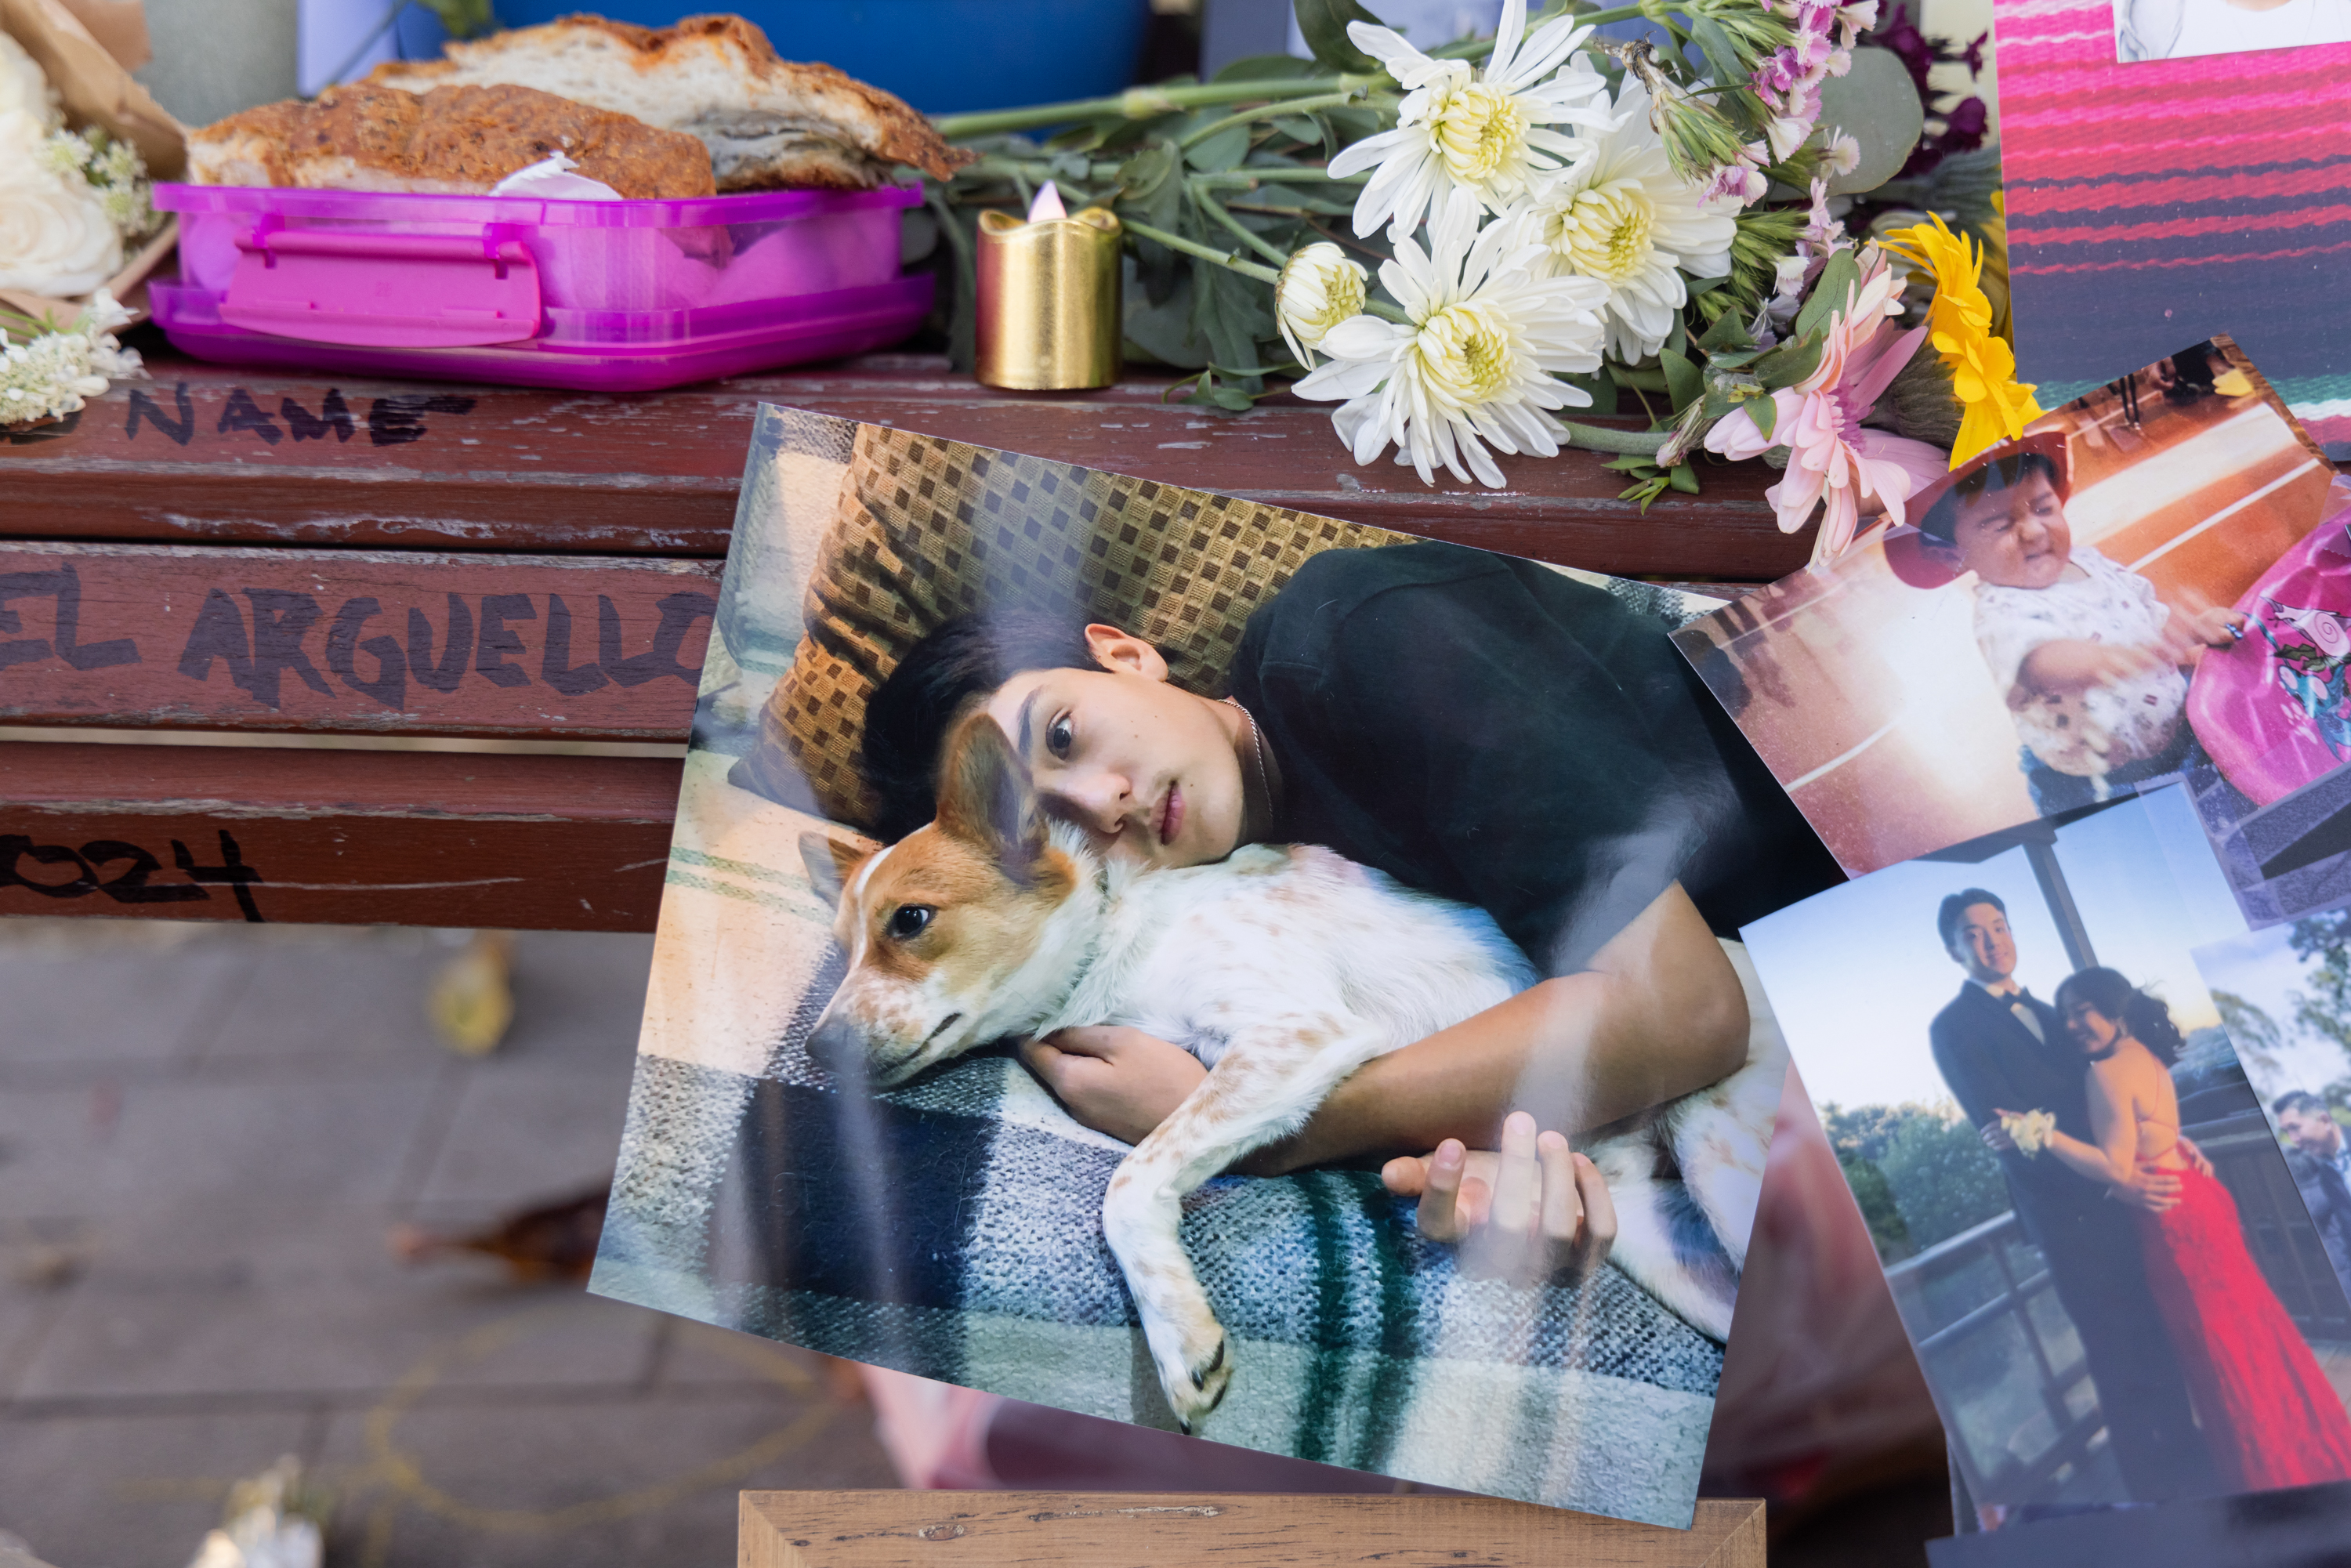 A memorial with flowers, lit candles, bread, and a photo of a person cuddling a dog. Other photos of happy moments are scattered around, creating a heartfelt tribute.